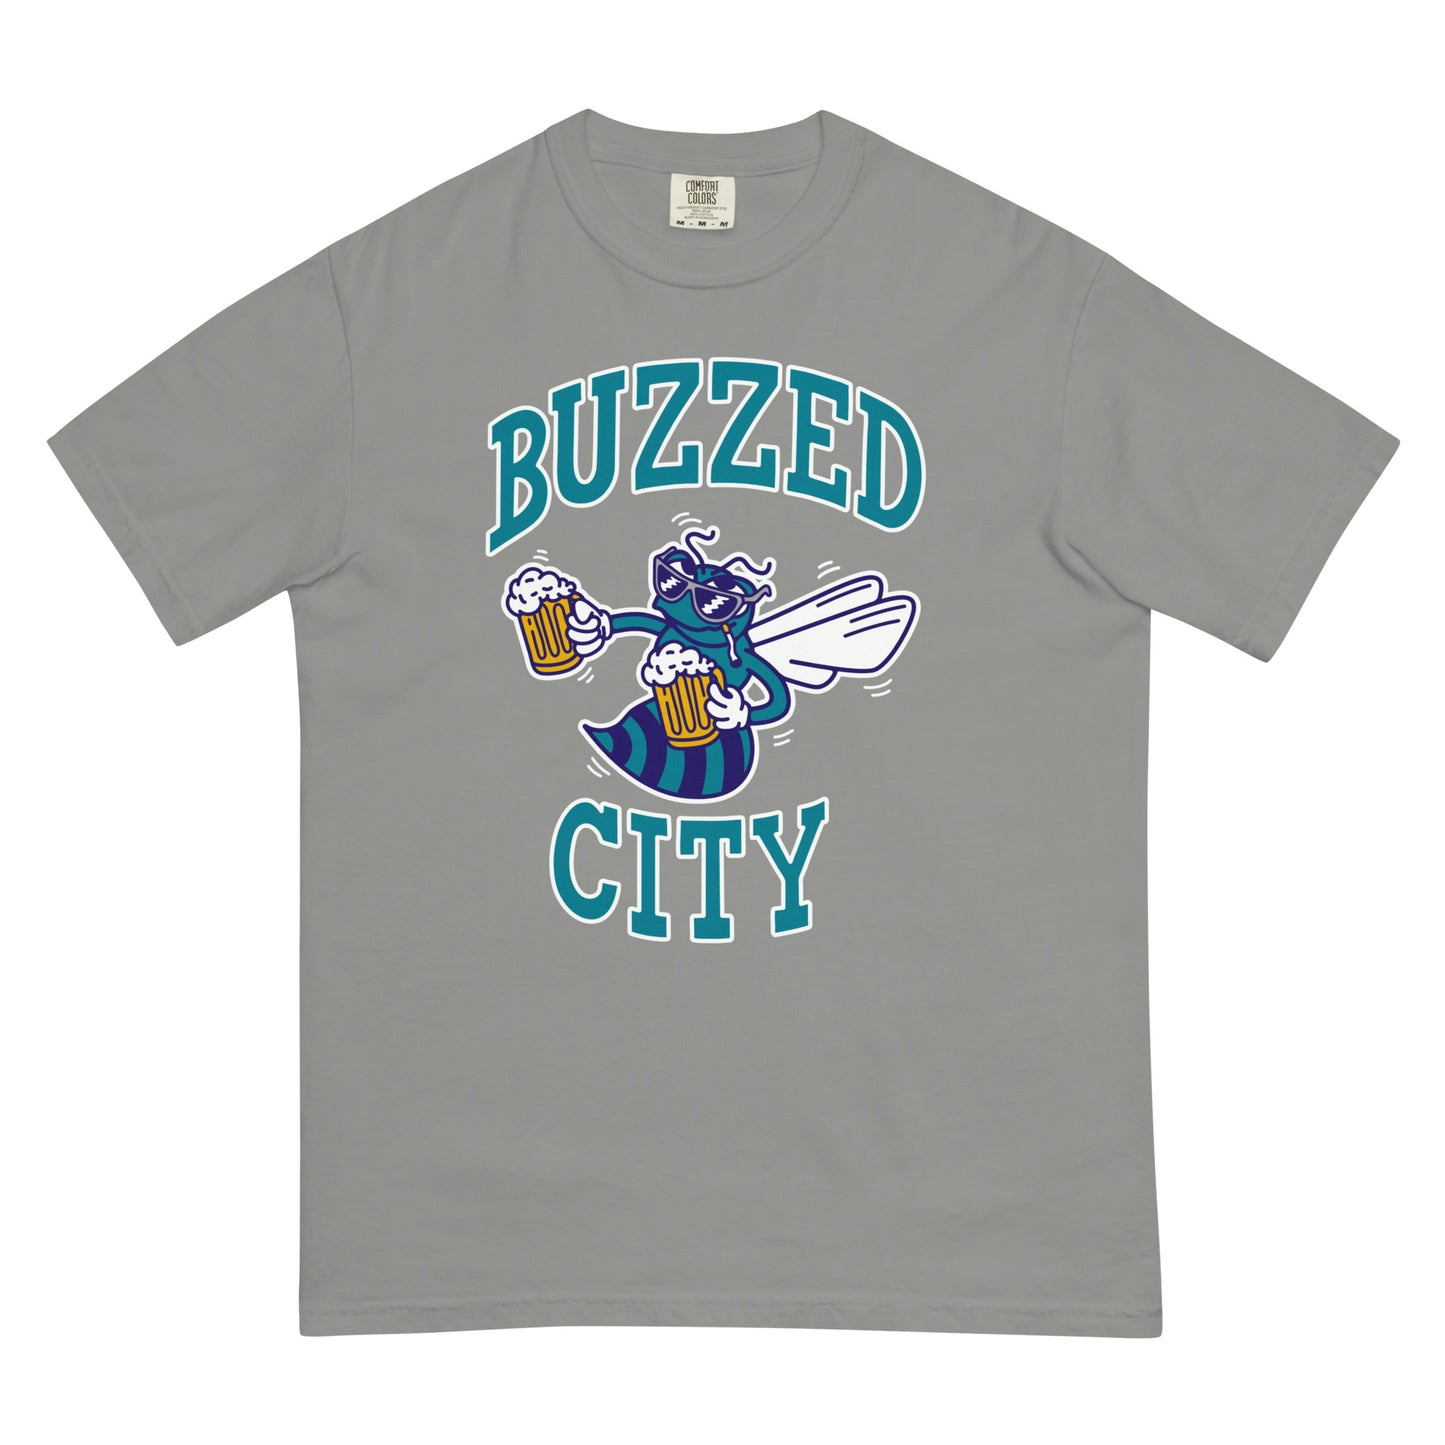 Buzzed City Teal Front